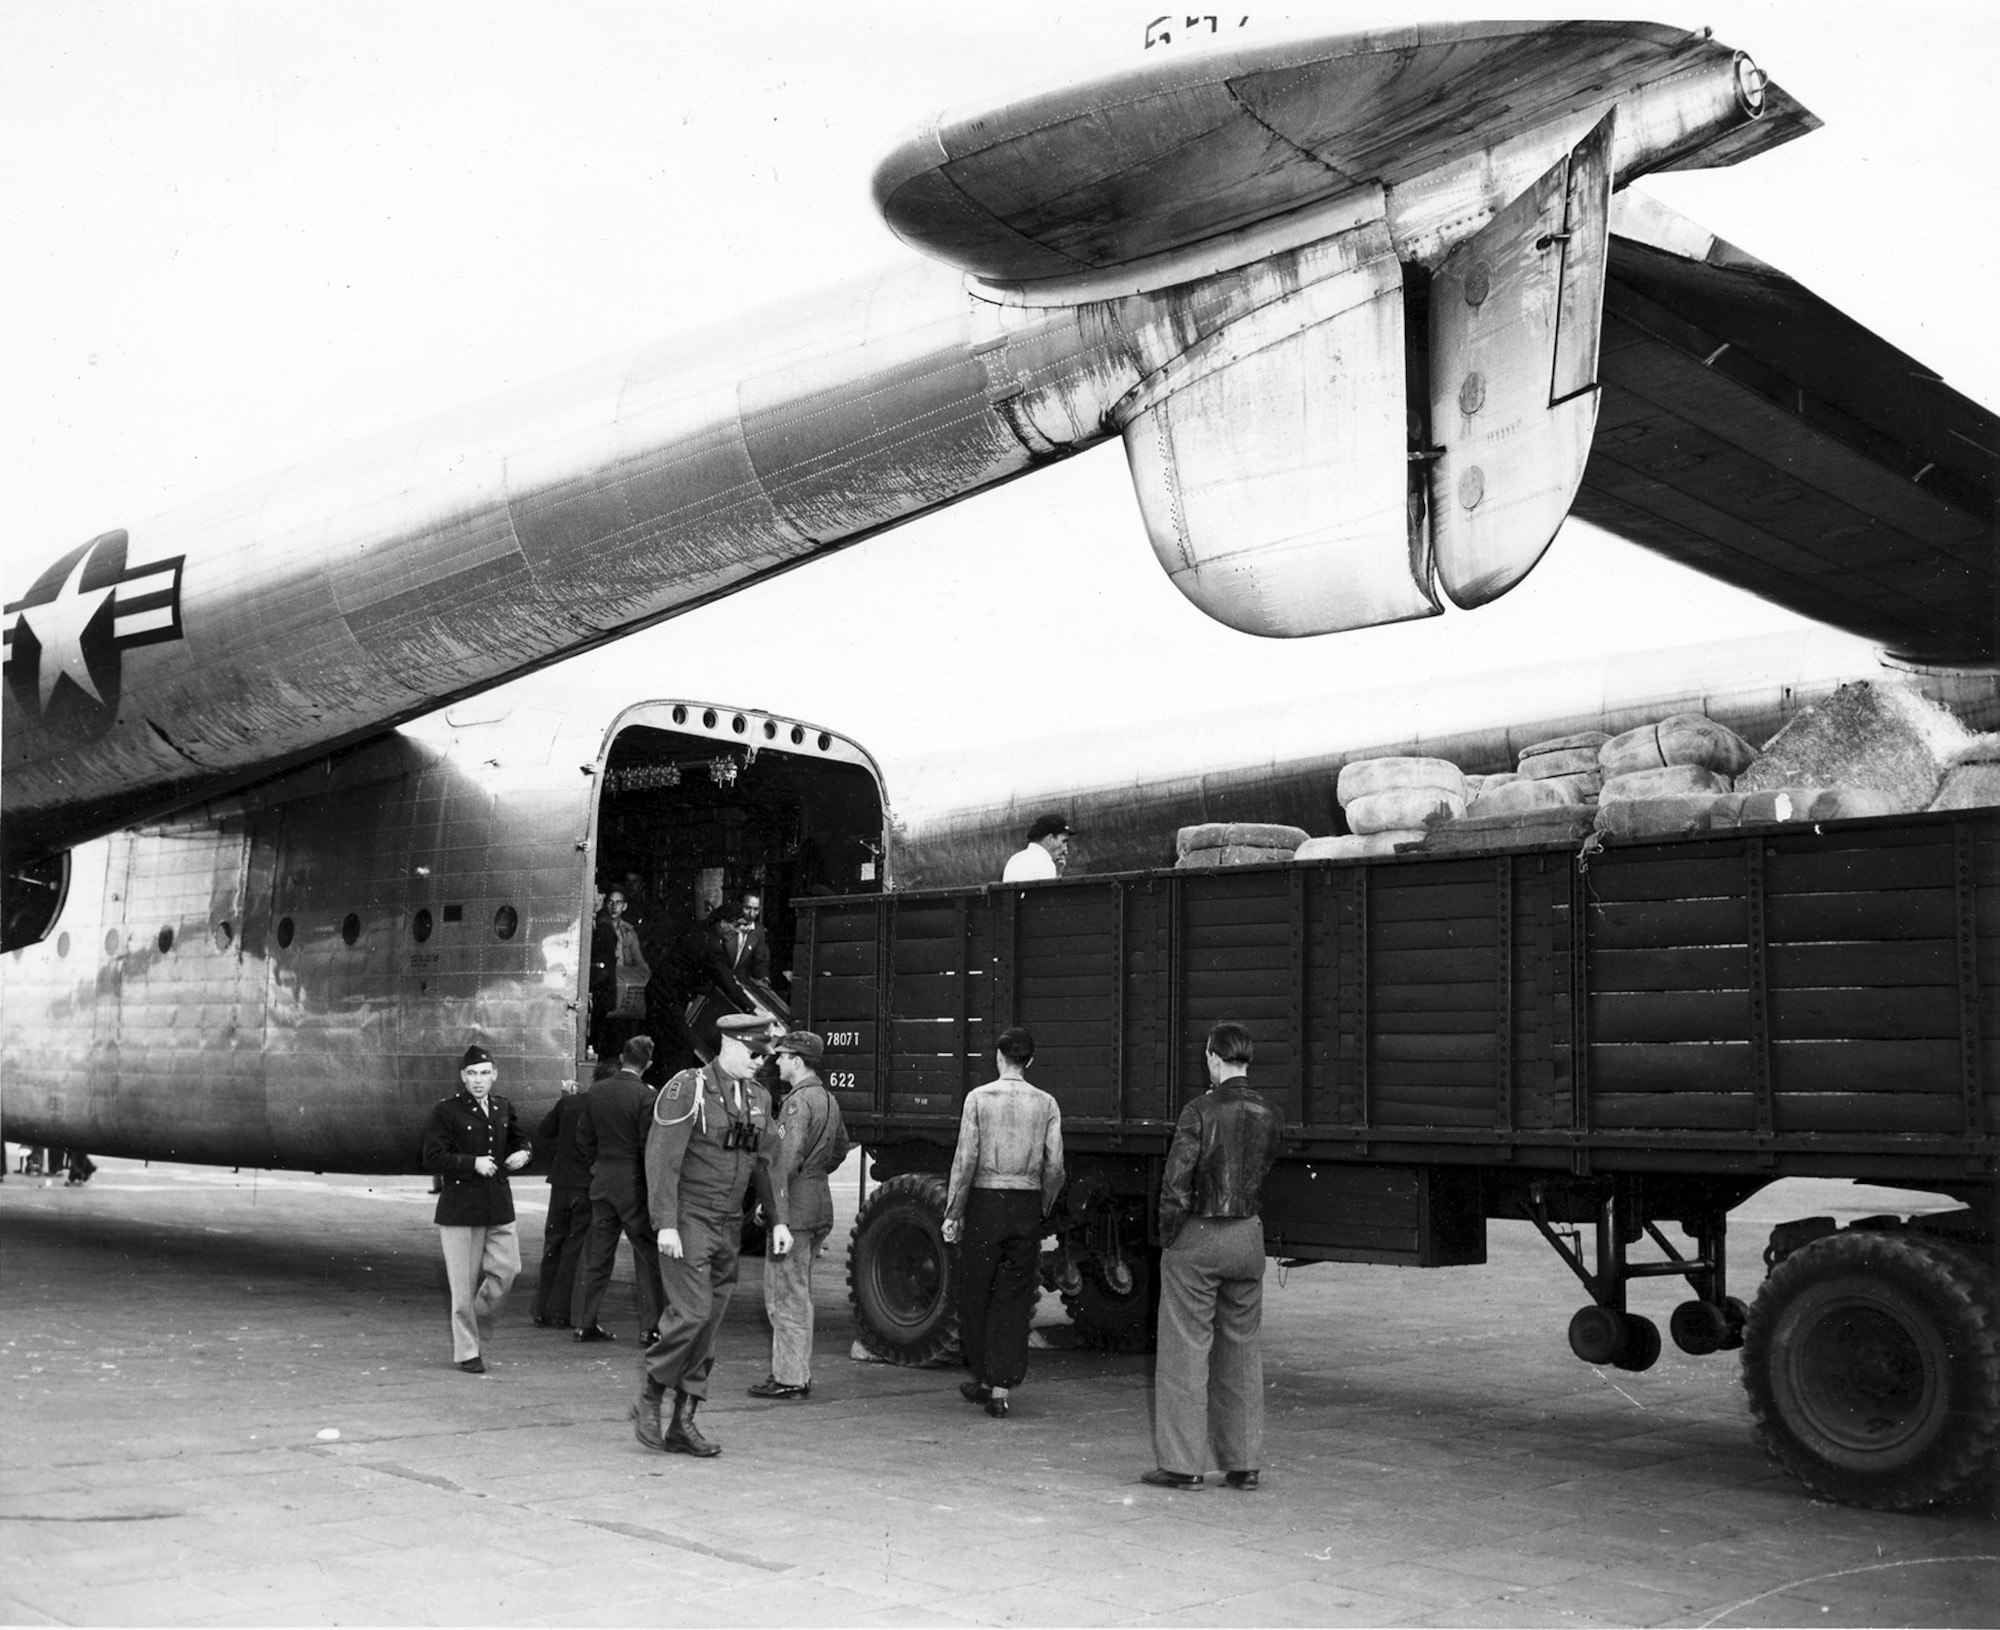 This C-82, shown here with its clamshell doors removed, assisted in the Berlin Airlift. (U.S. Air Force photo)